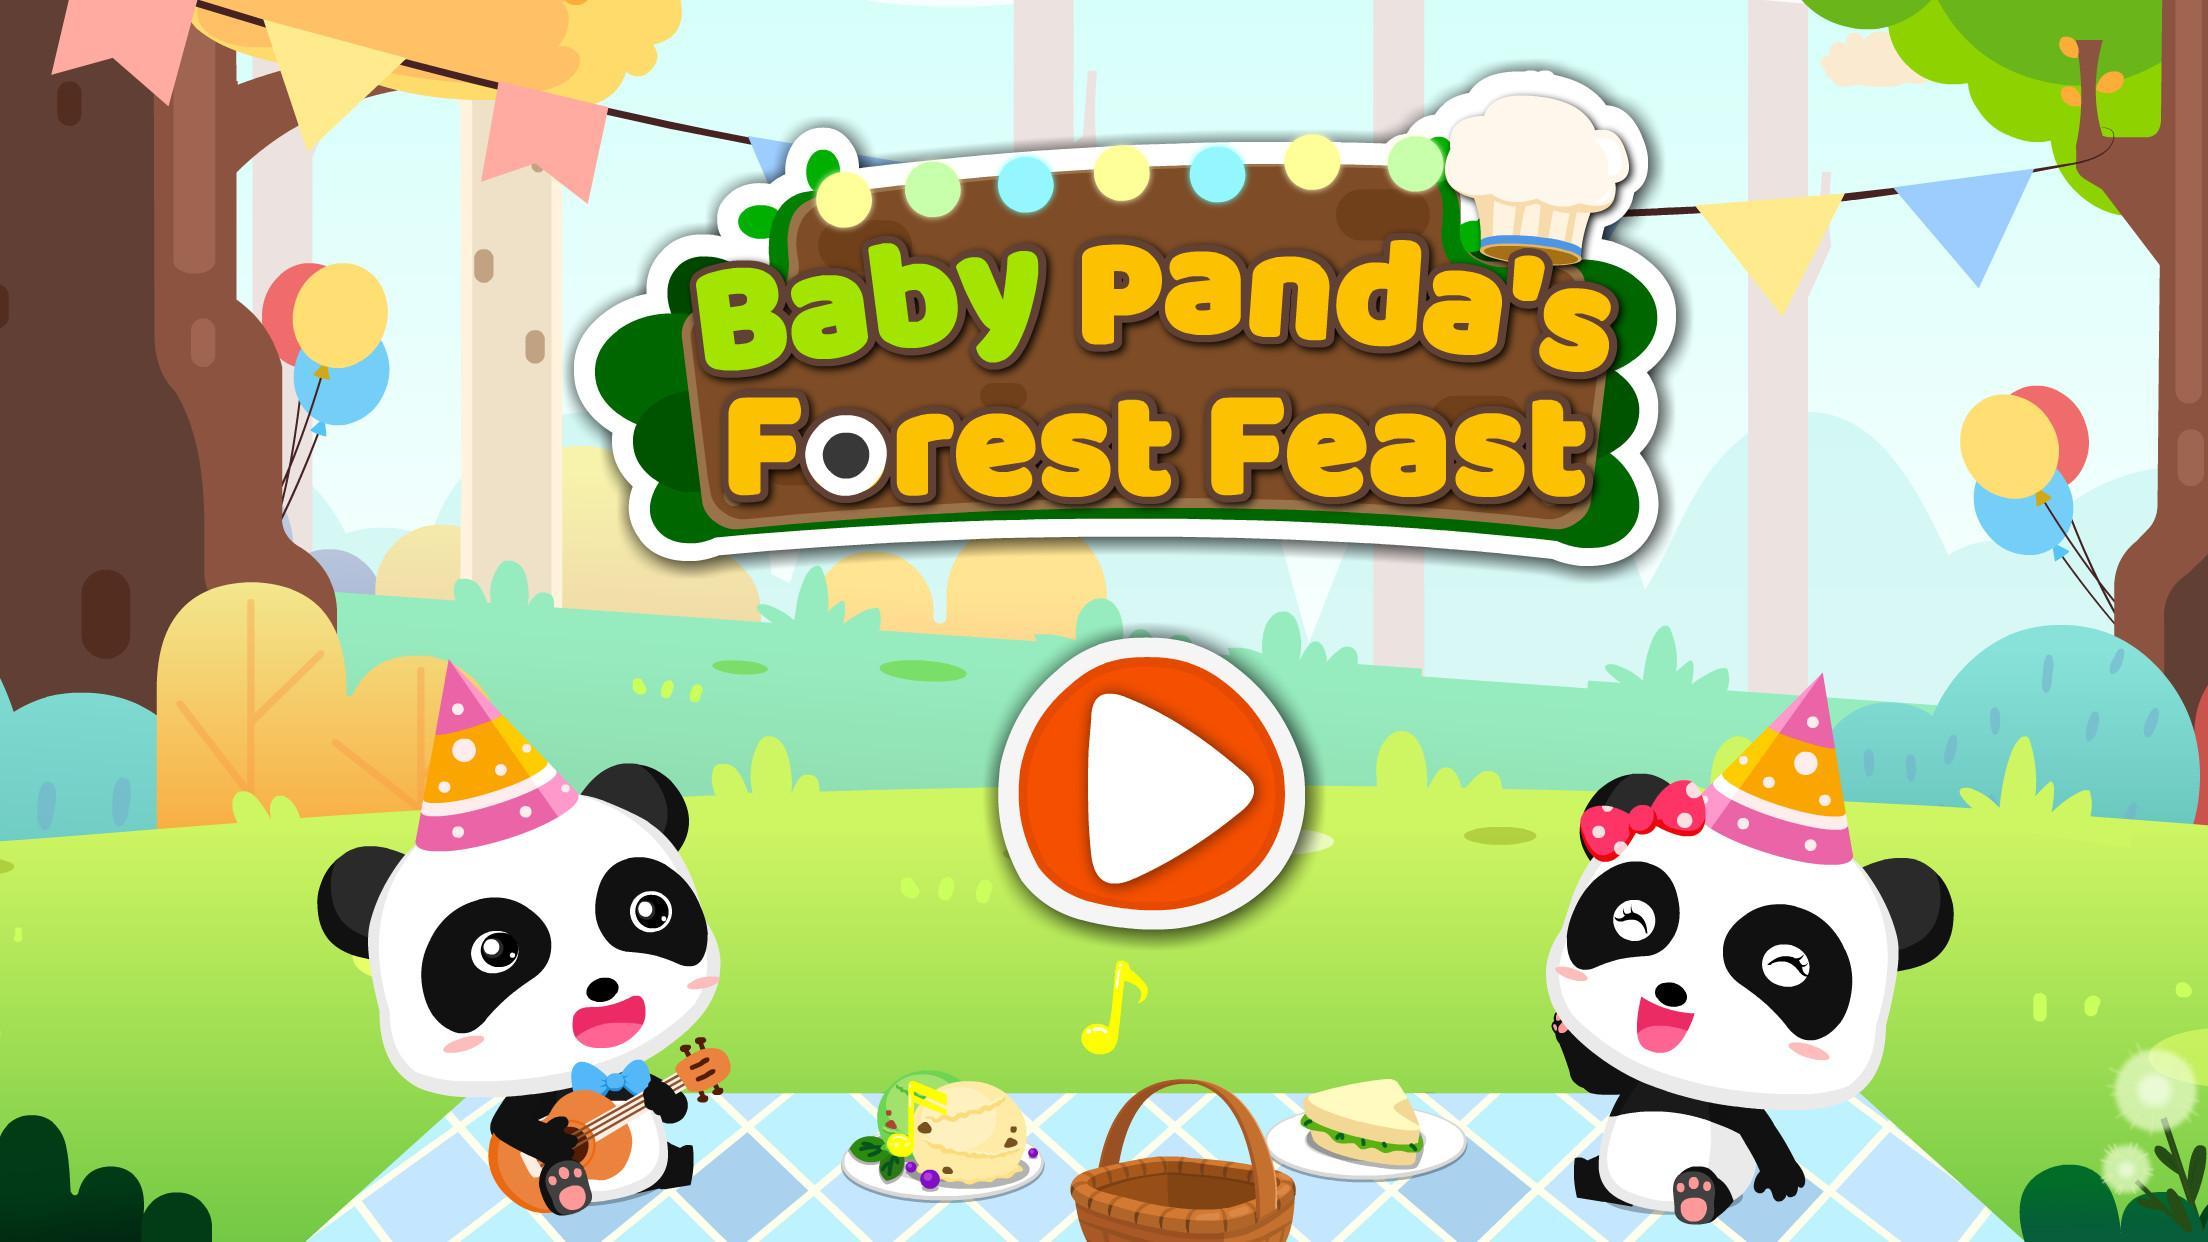 Baby Panda’s Forest Recipes